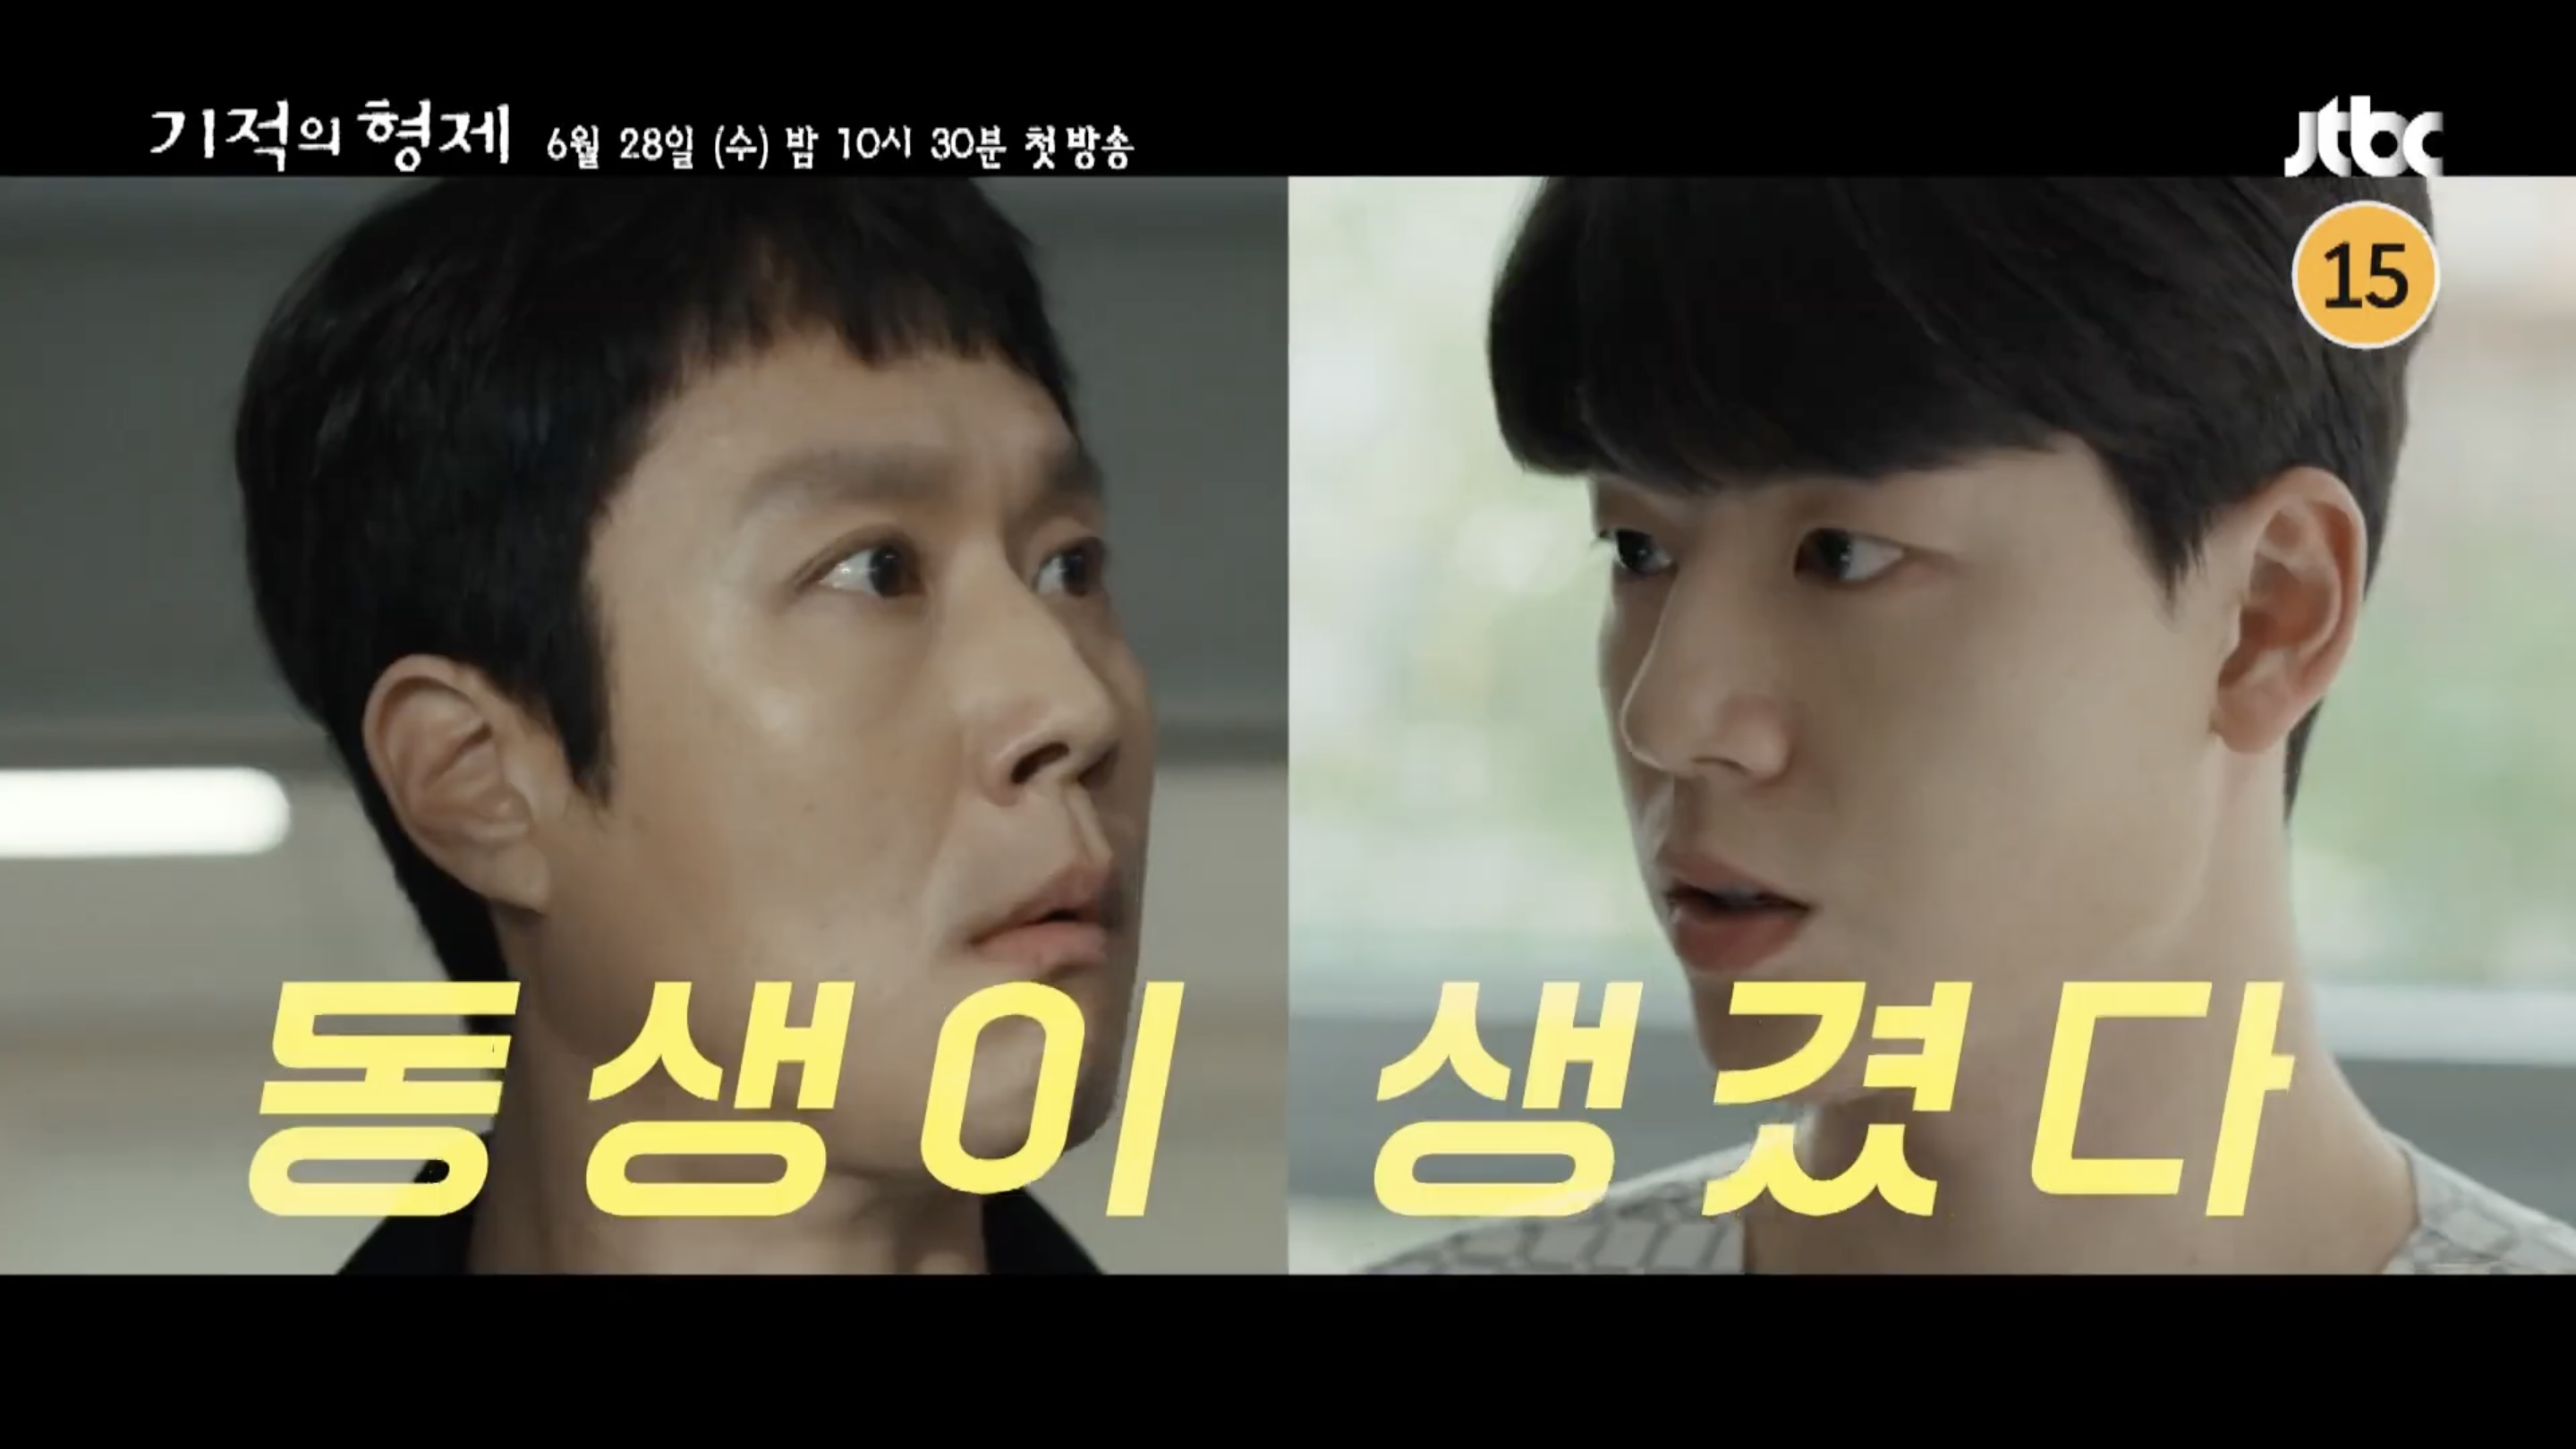 Jung Woo and Bae Hyun-sung join hands as Miracle Brothers